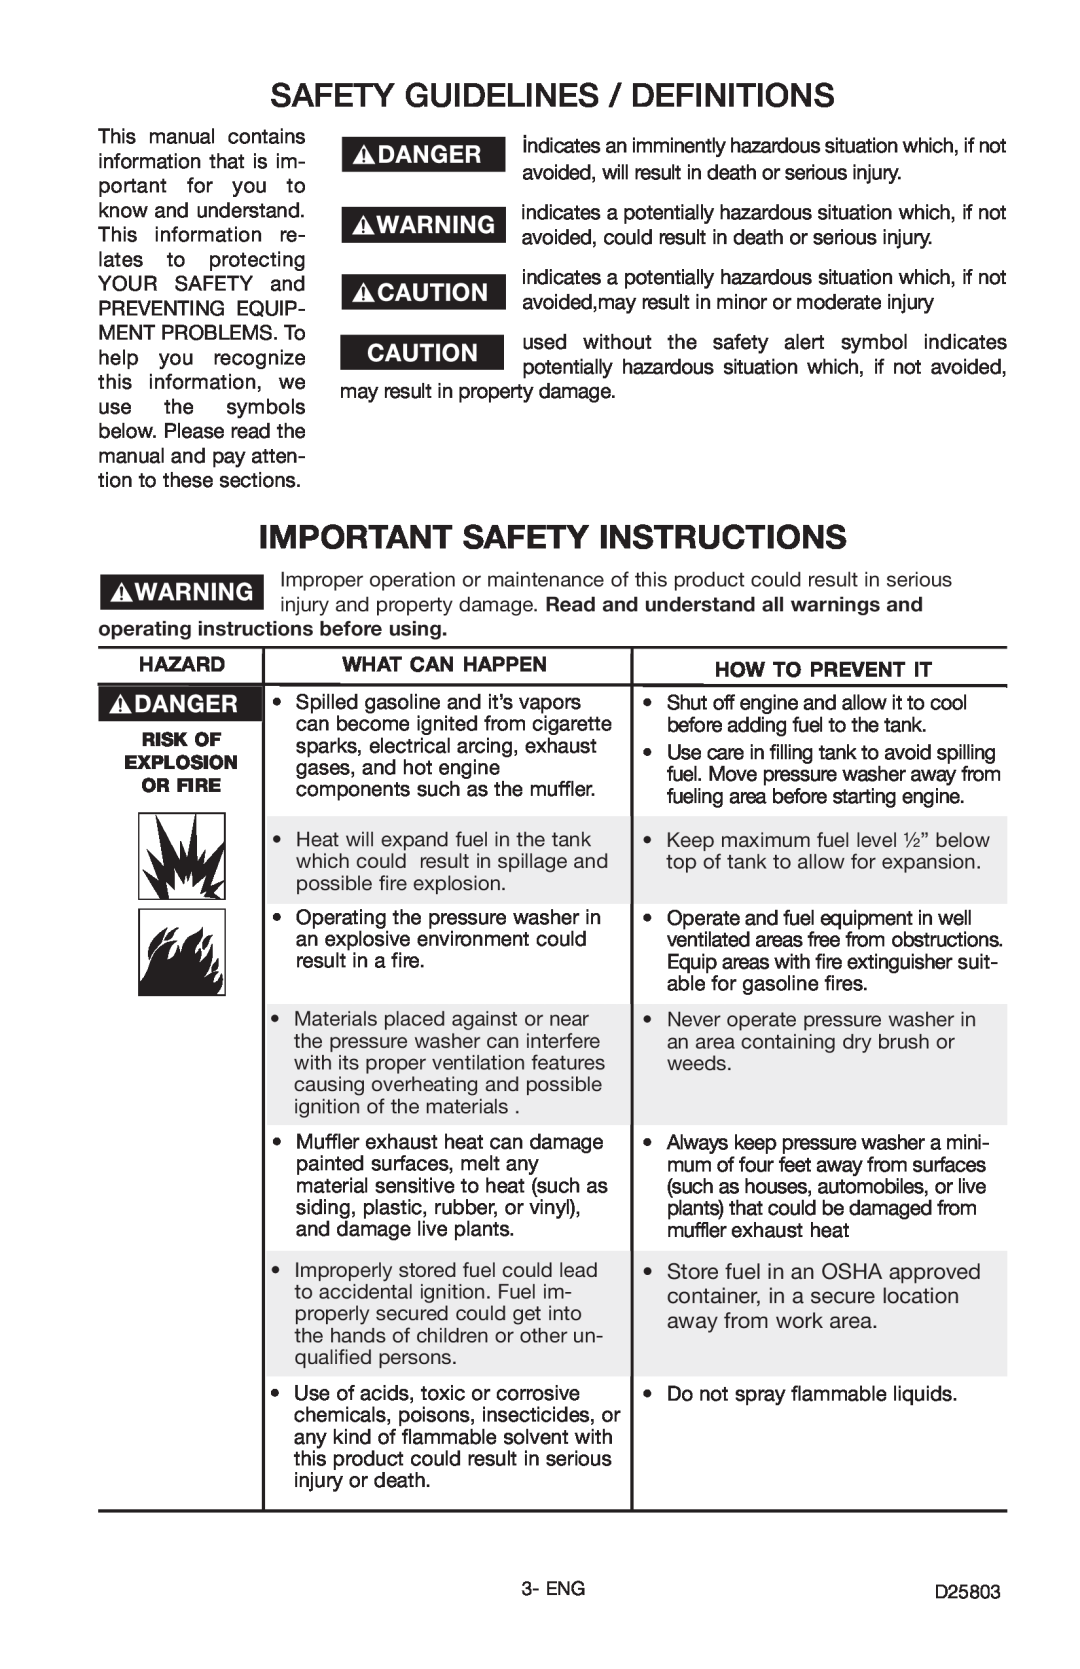 Porter-Cable D25803-025-1, PCH2401 Important Safety Instructions, Safety Guidelines / Definitions, Hazard, What Can Happen 